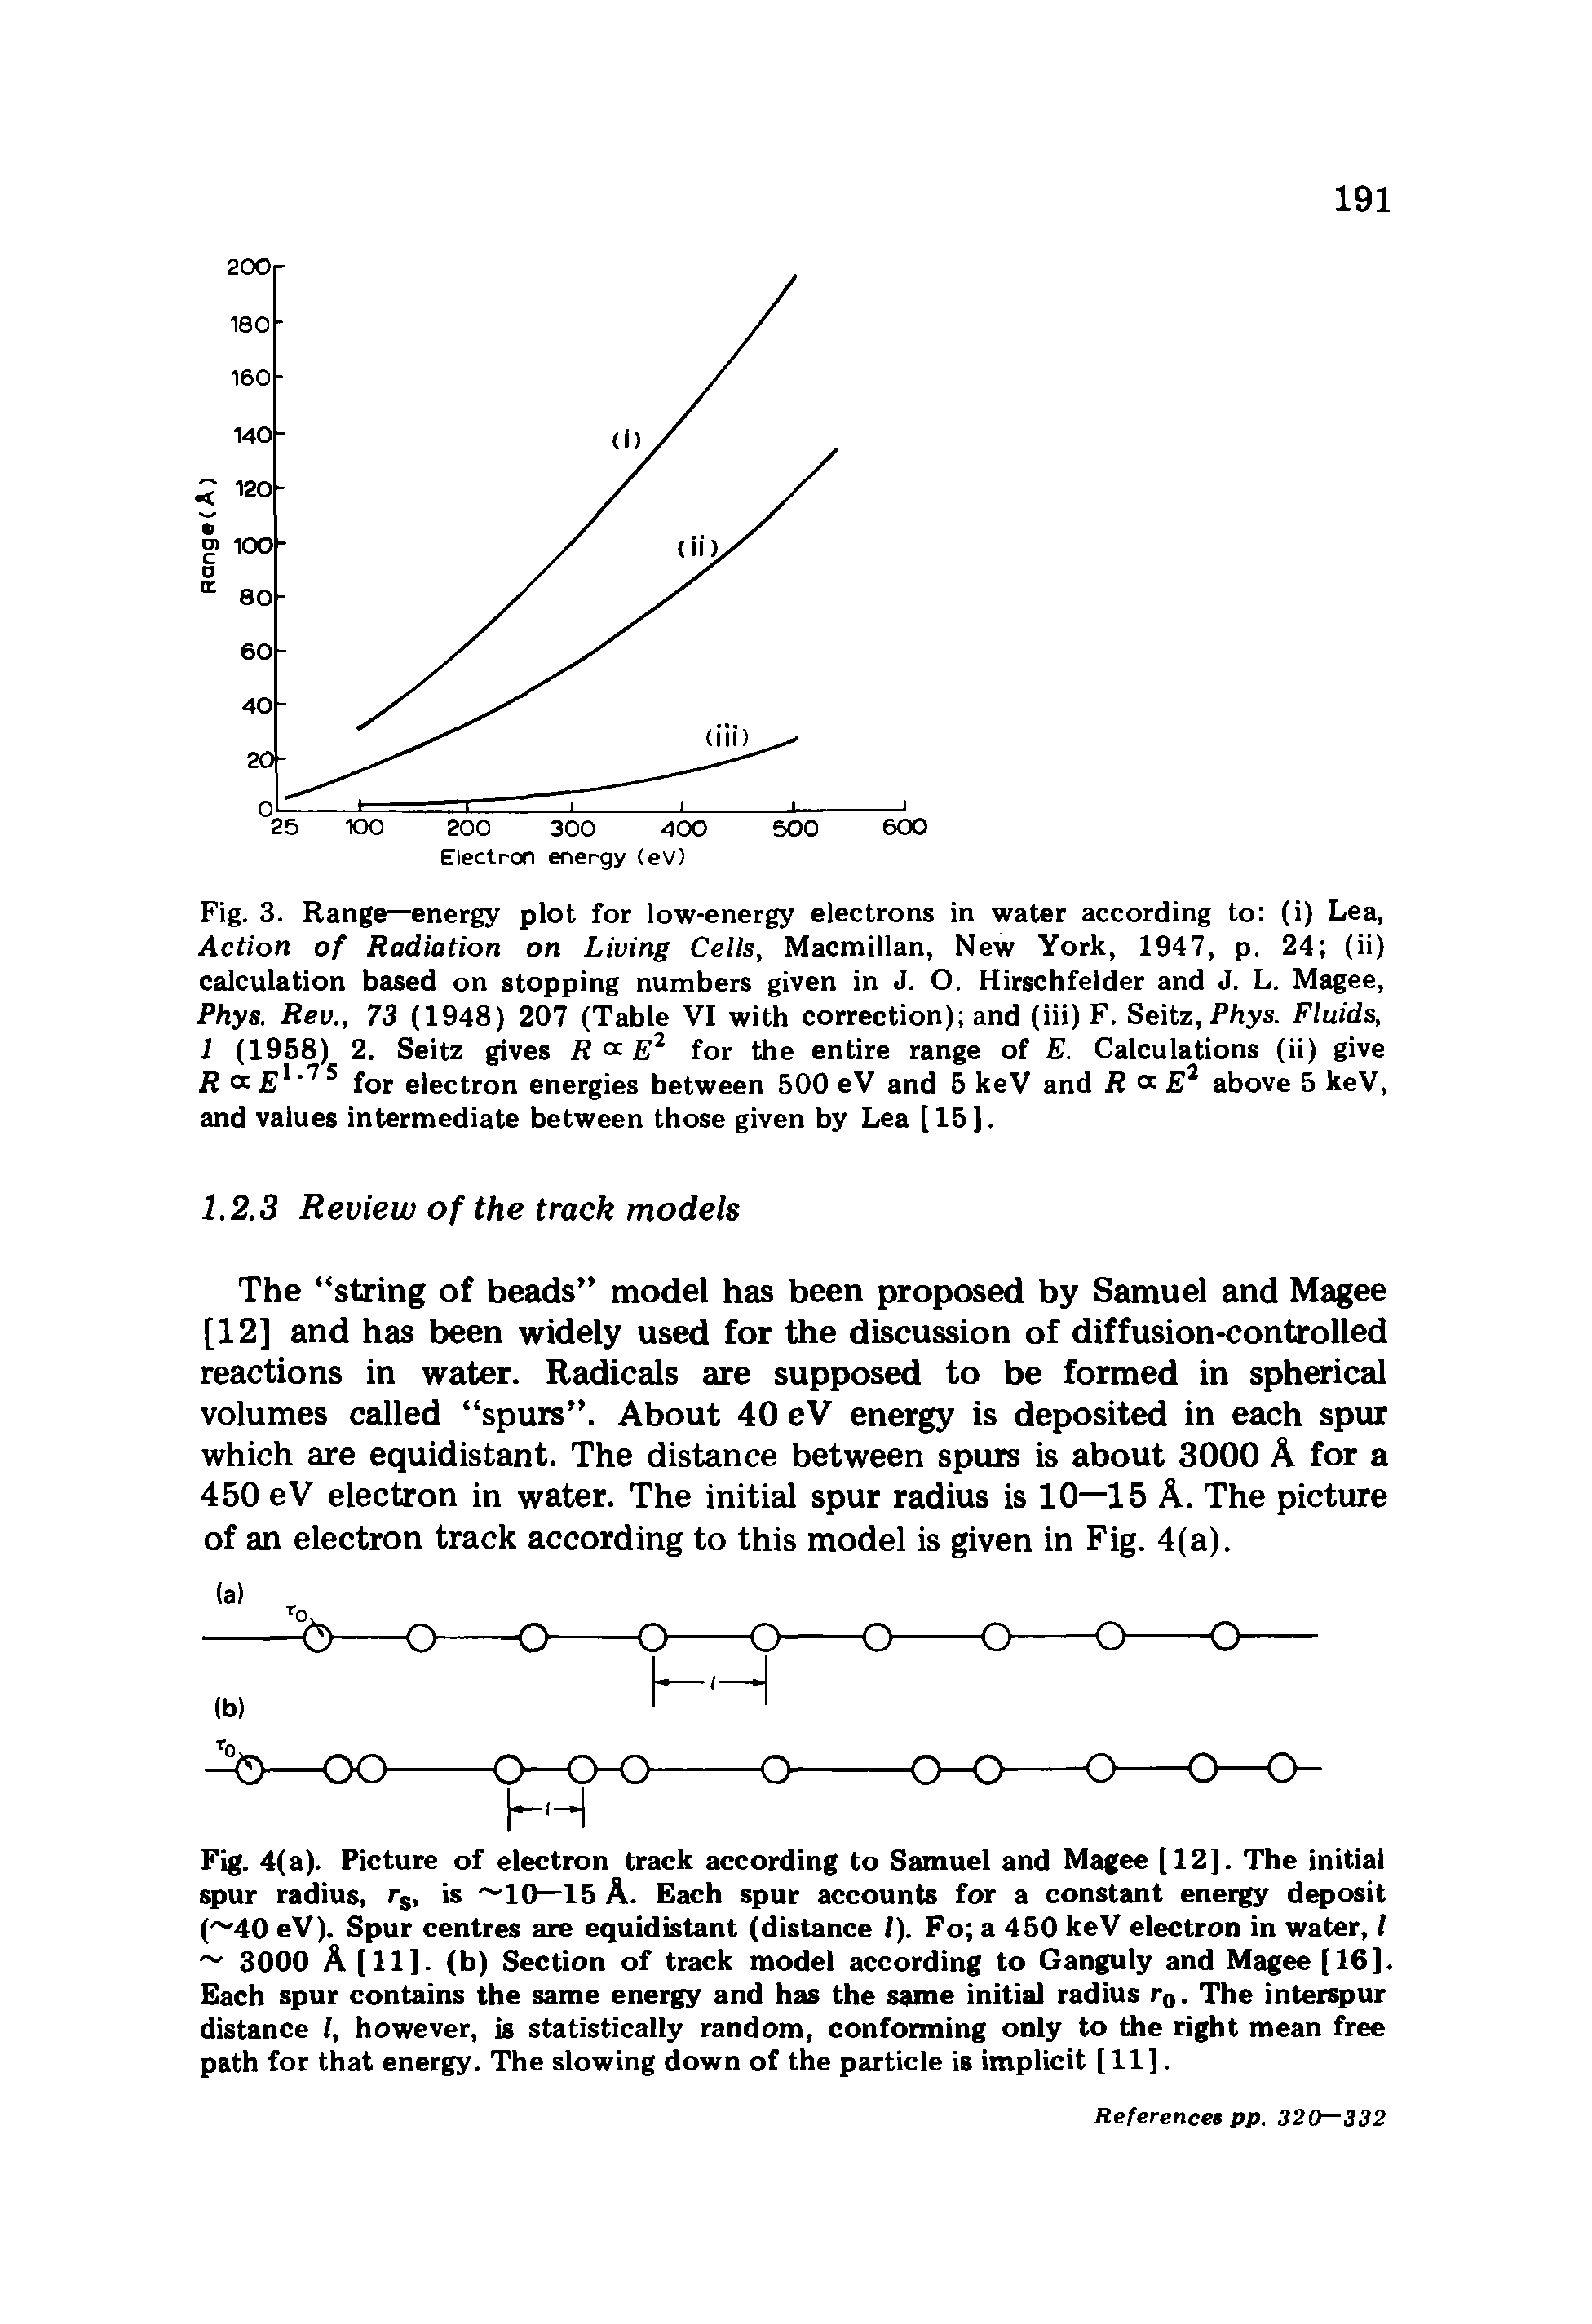 Fig. 3. Range—energy plot for low-energy electrons in water according to (i) Lea, Action of Radiation on Living Cells, Macmillan, New York, 1947, p. 24 (ii) calculation based on stopping numbers given in J. O. Hirschfelder and J. L. Magee, Phys. Rev., 73 (1948) 207 (Table VI with correction) and (iii) F. Seitz, Phys. Fluids,...